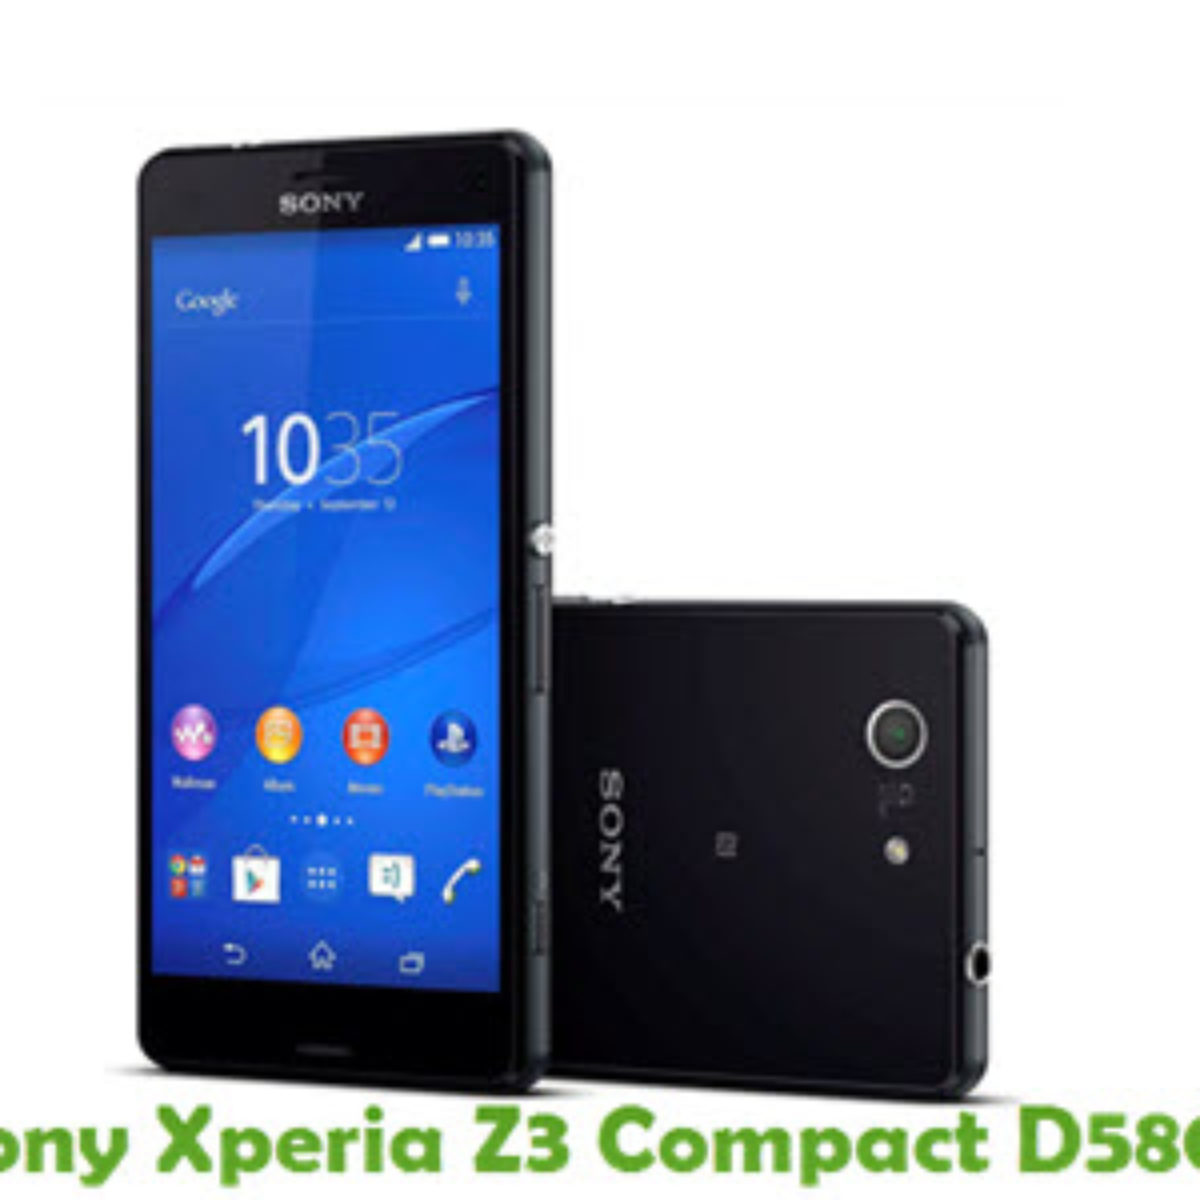 interferentie Feodaal Echt Download Sony Xperia Z3 Compact D5803 Stock ROM - Stock ROM Files